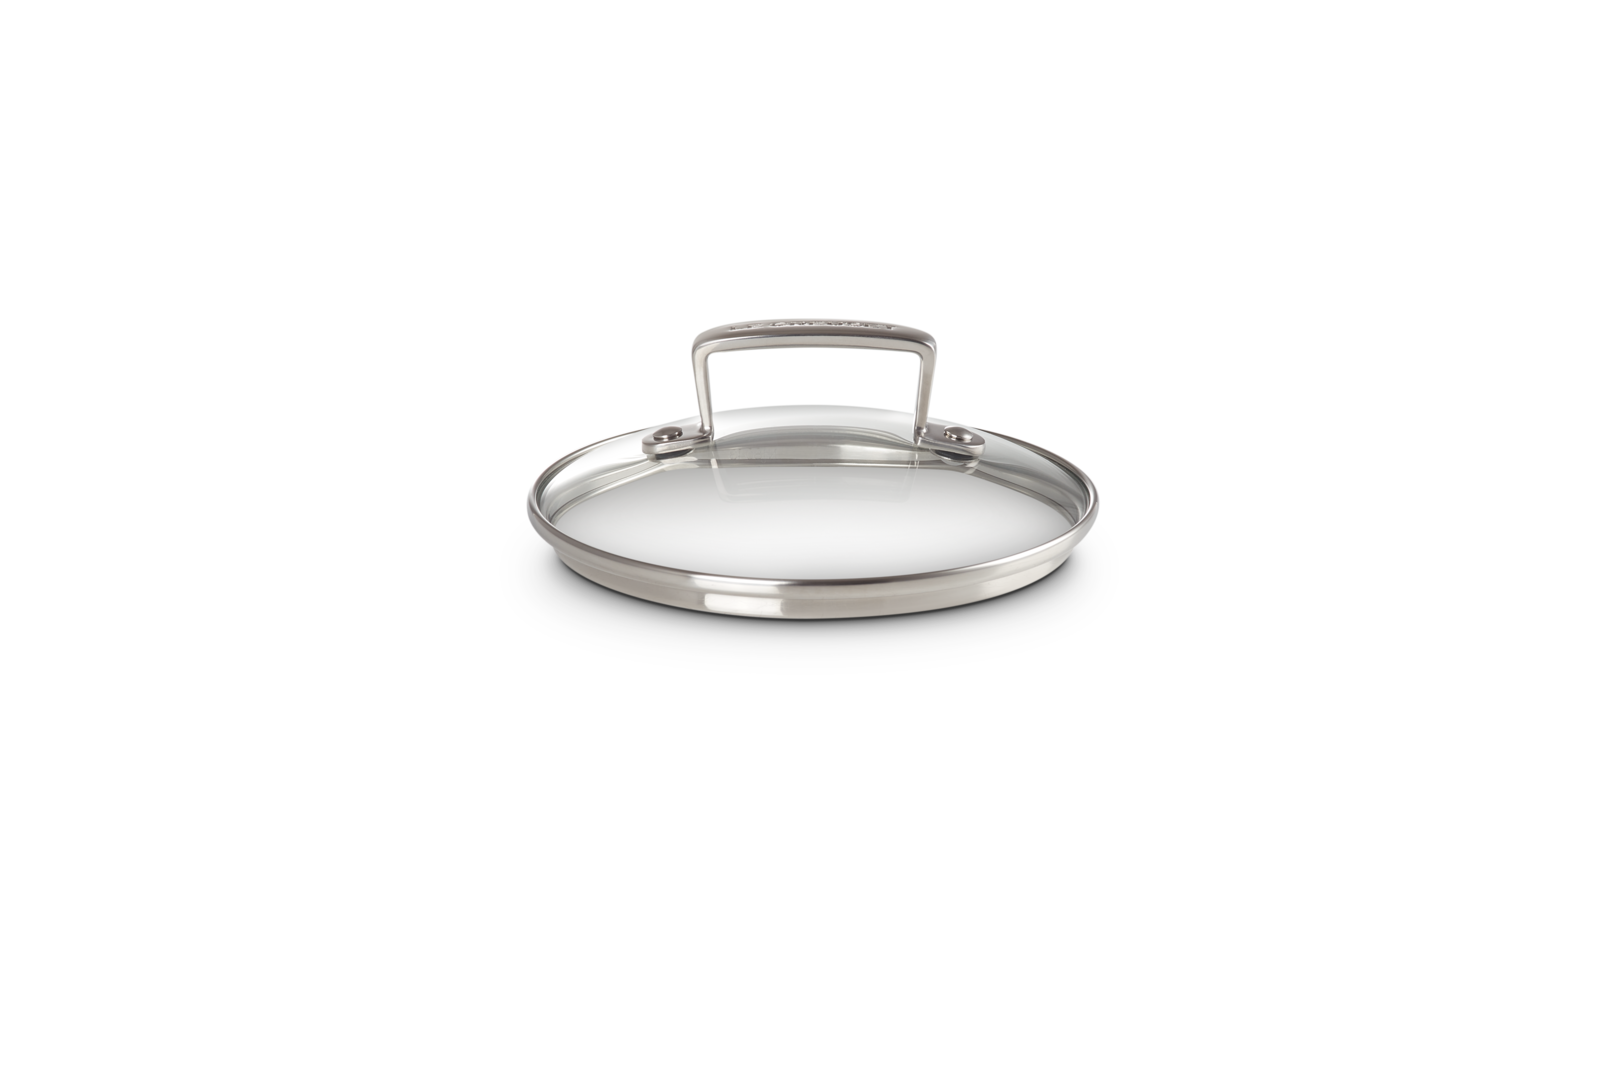 oven proof safety glass lid 26 cm with Stainless Steel Ring on all standard Shapes 